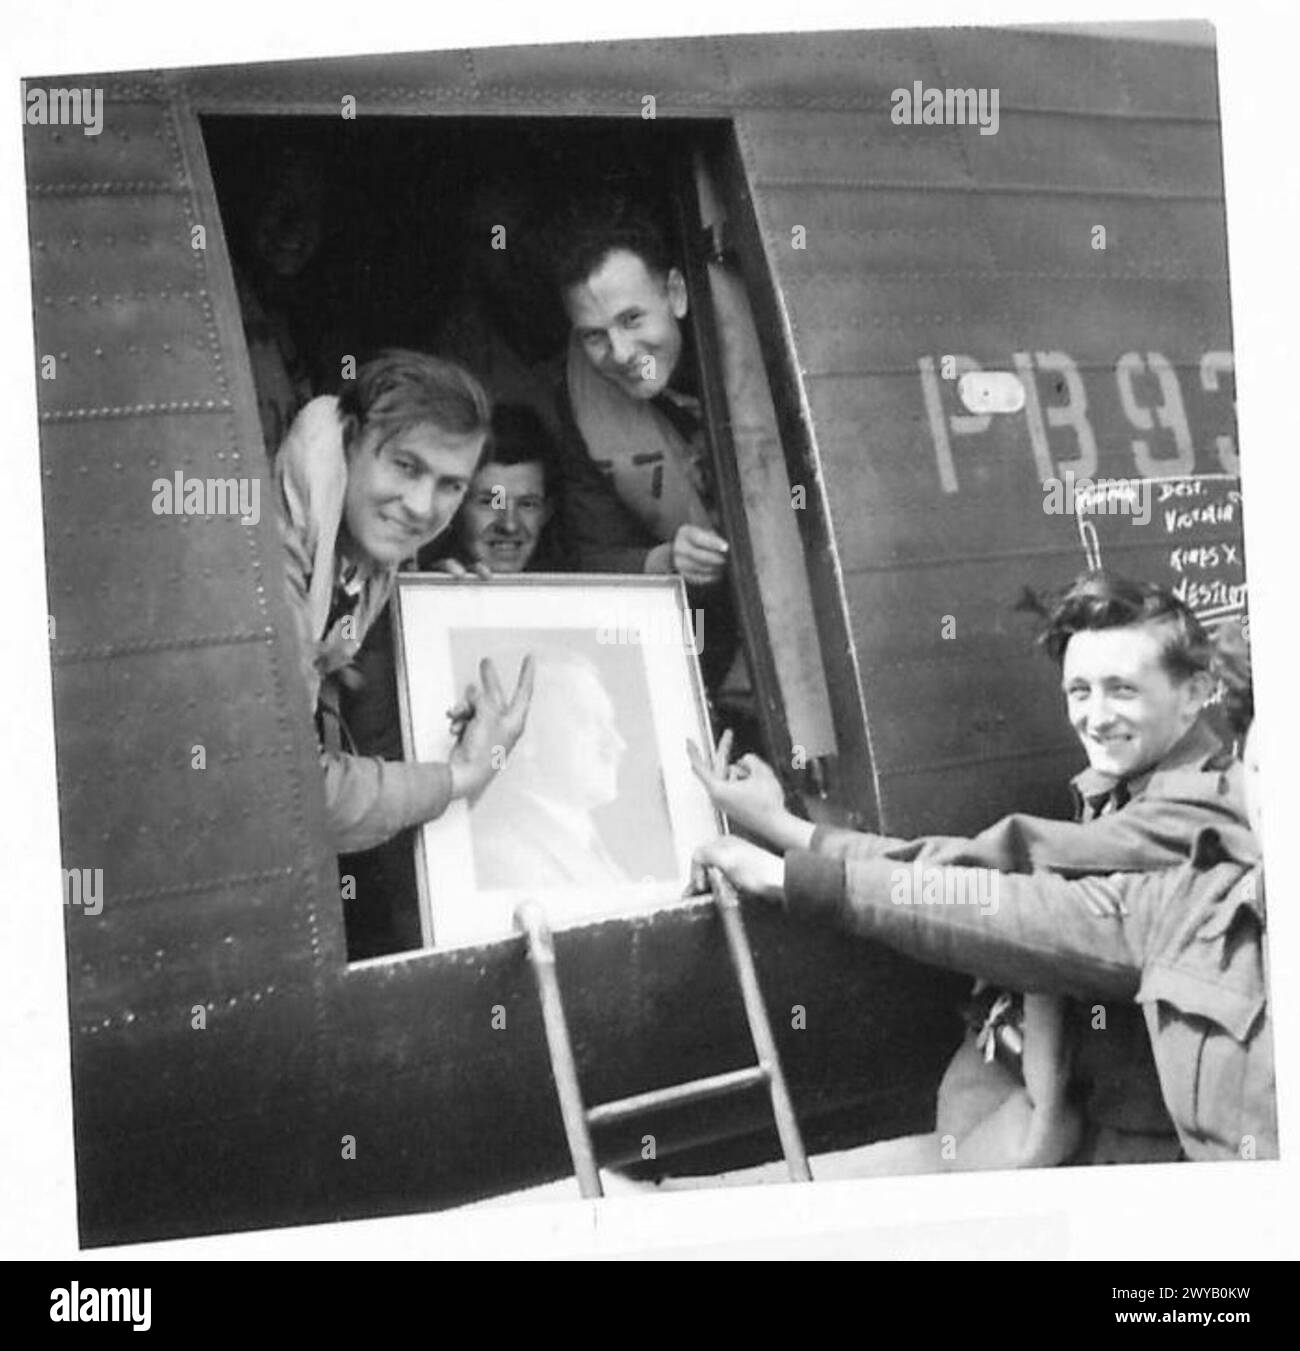 EX-BRITISH POWs RETURNING HOME BY AIR - Original wartime caption: Smiling happy faces, show the 'V' sign to a portrait of Hitler. Photographic negative , British Army, 21st Army Group Stock Photo